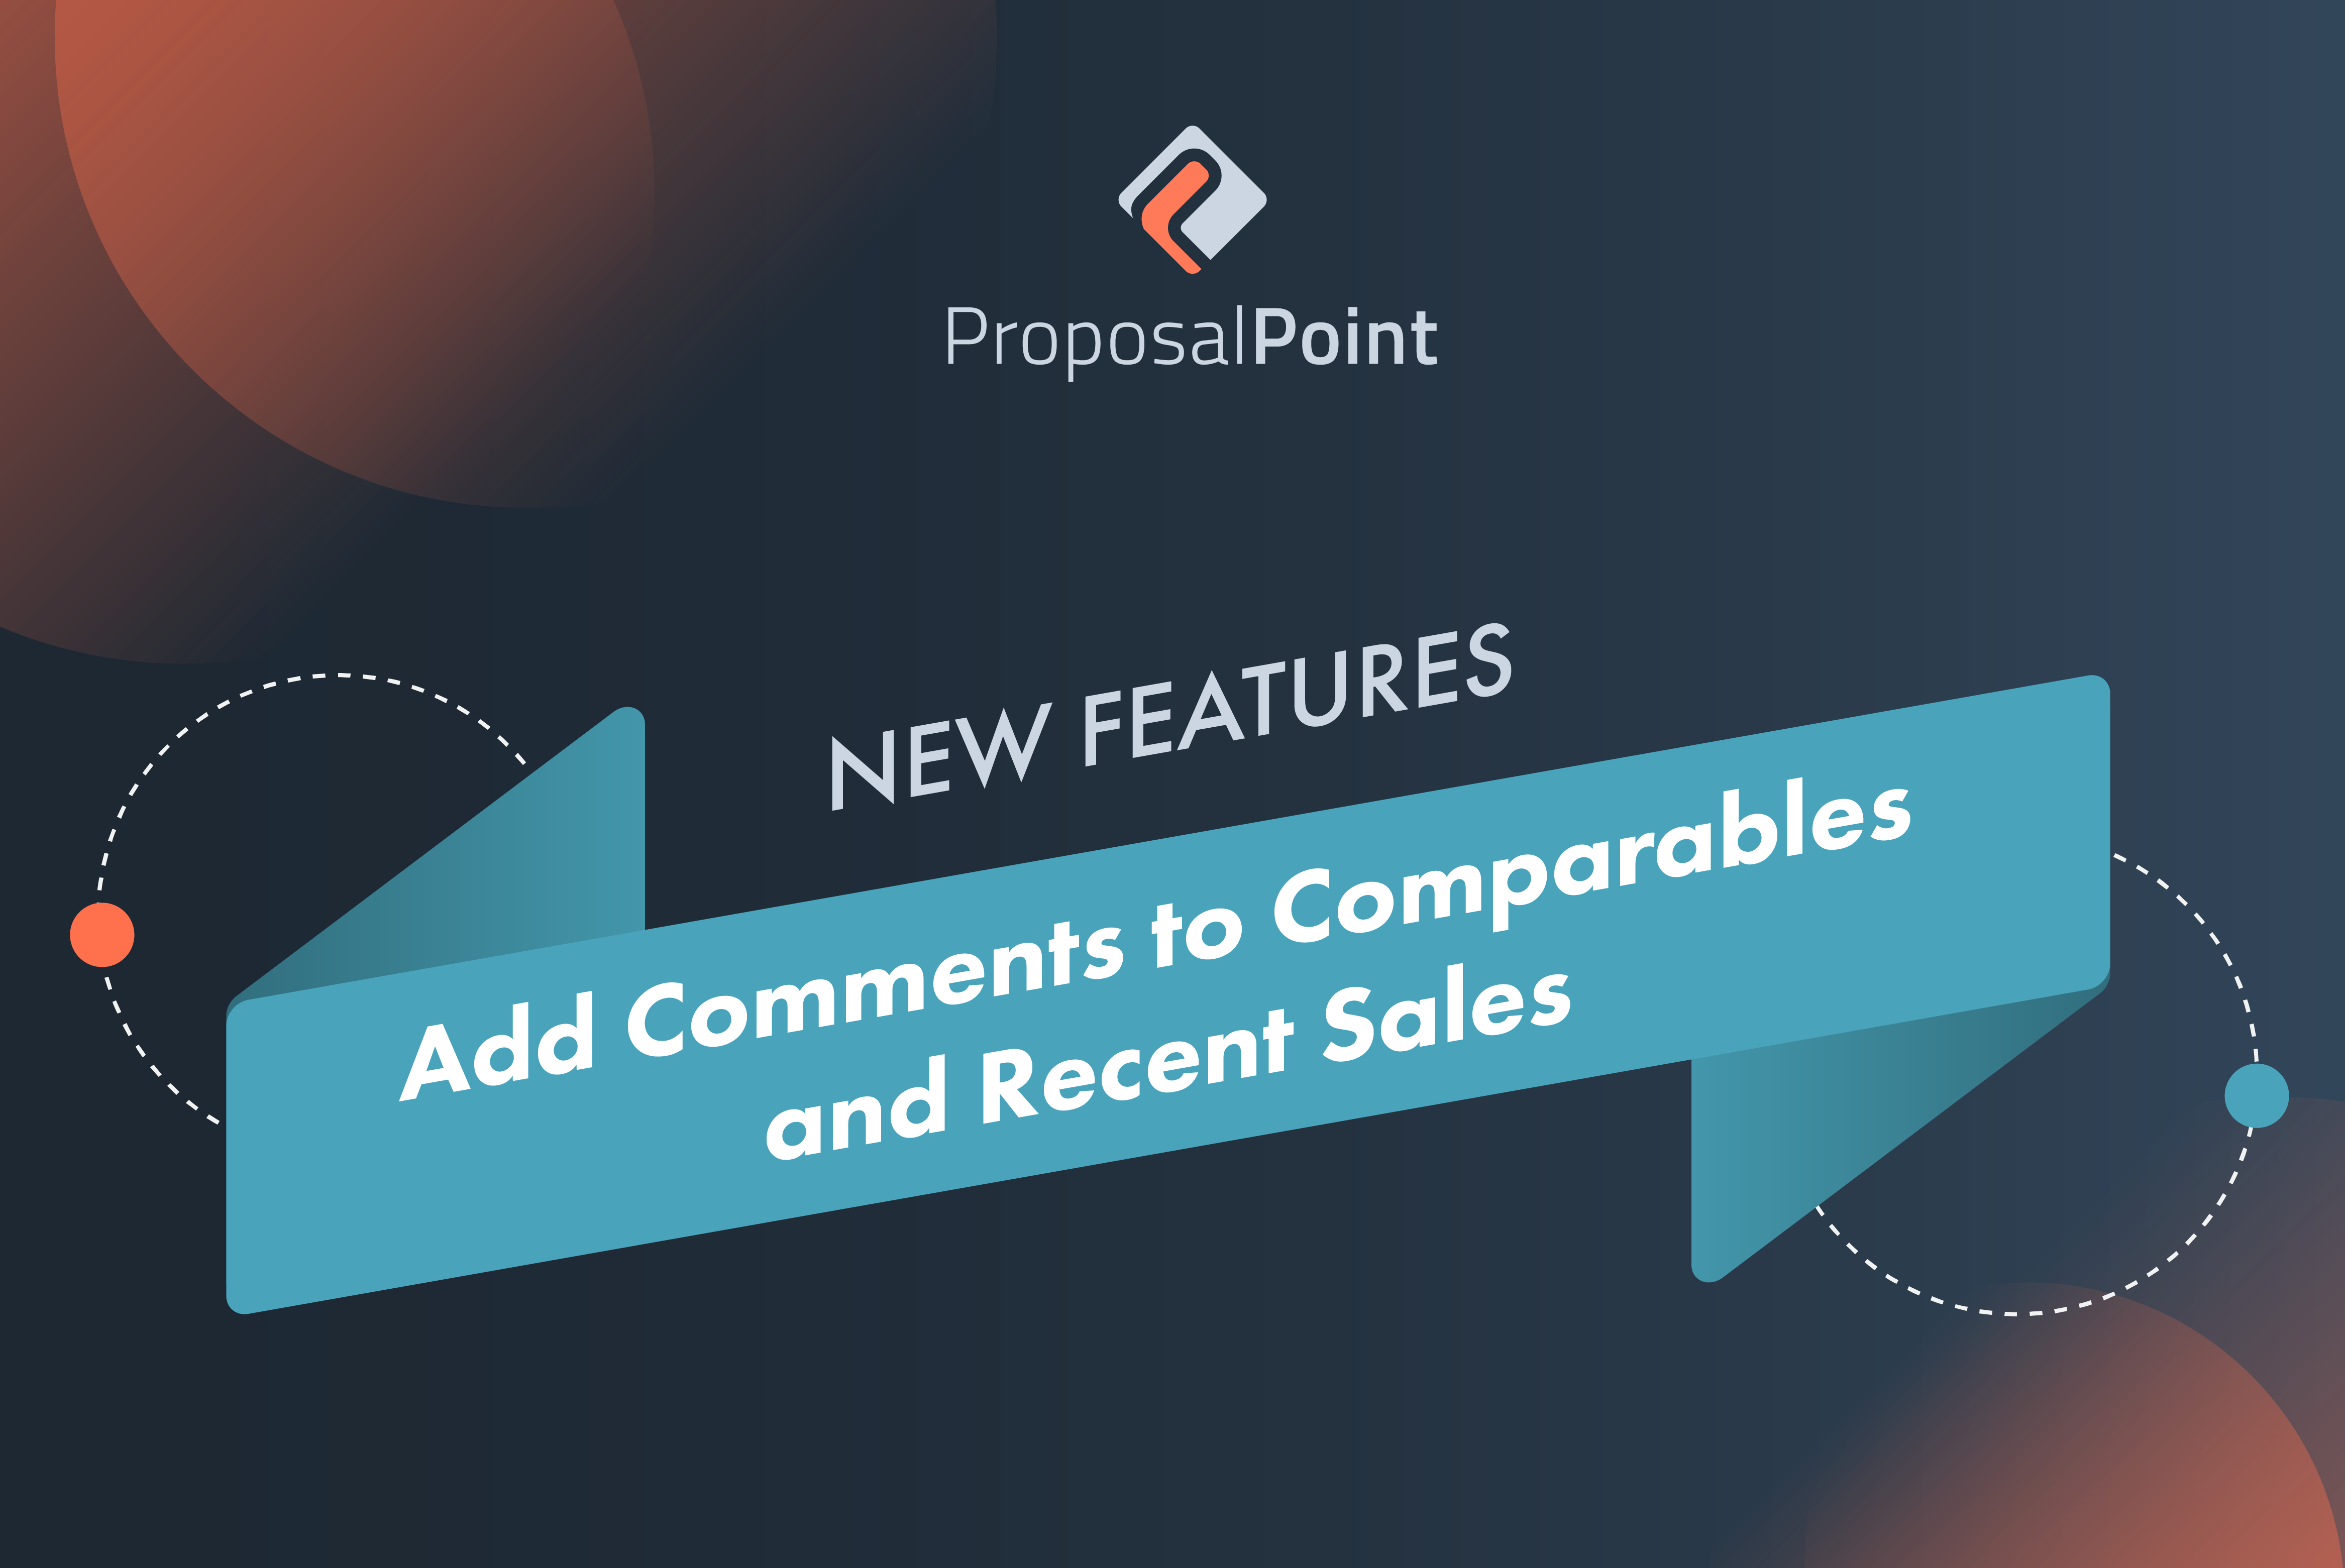 New Feature: Add Comments to Comparables and Recent Sales